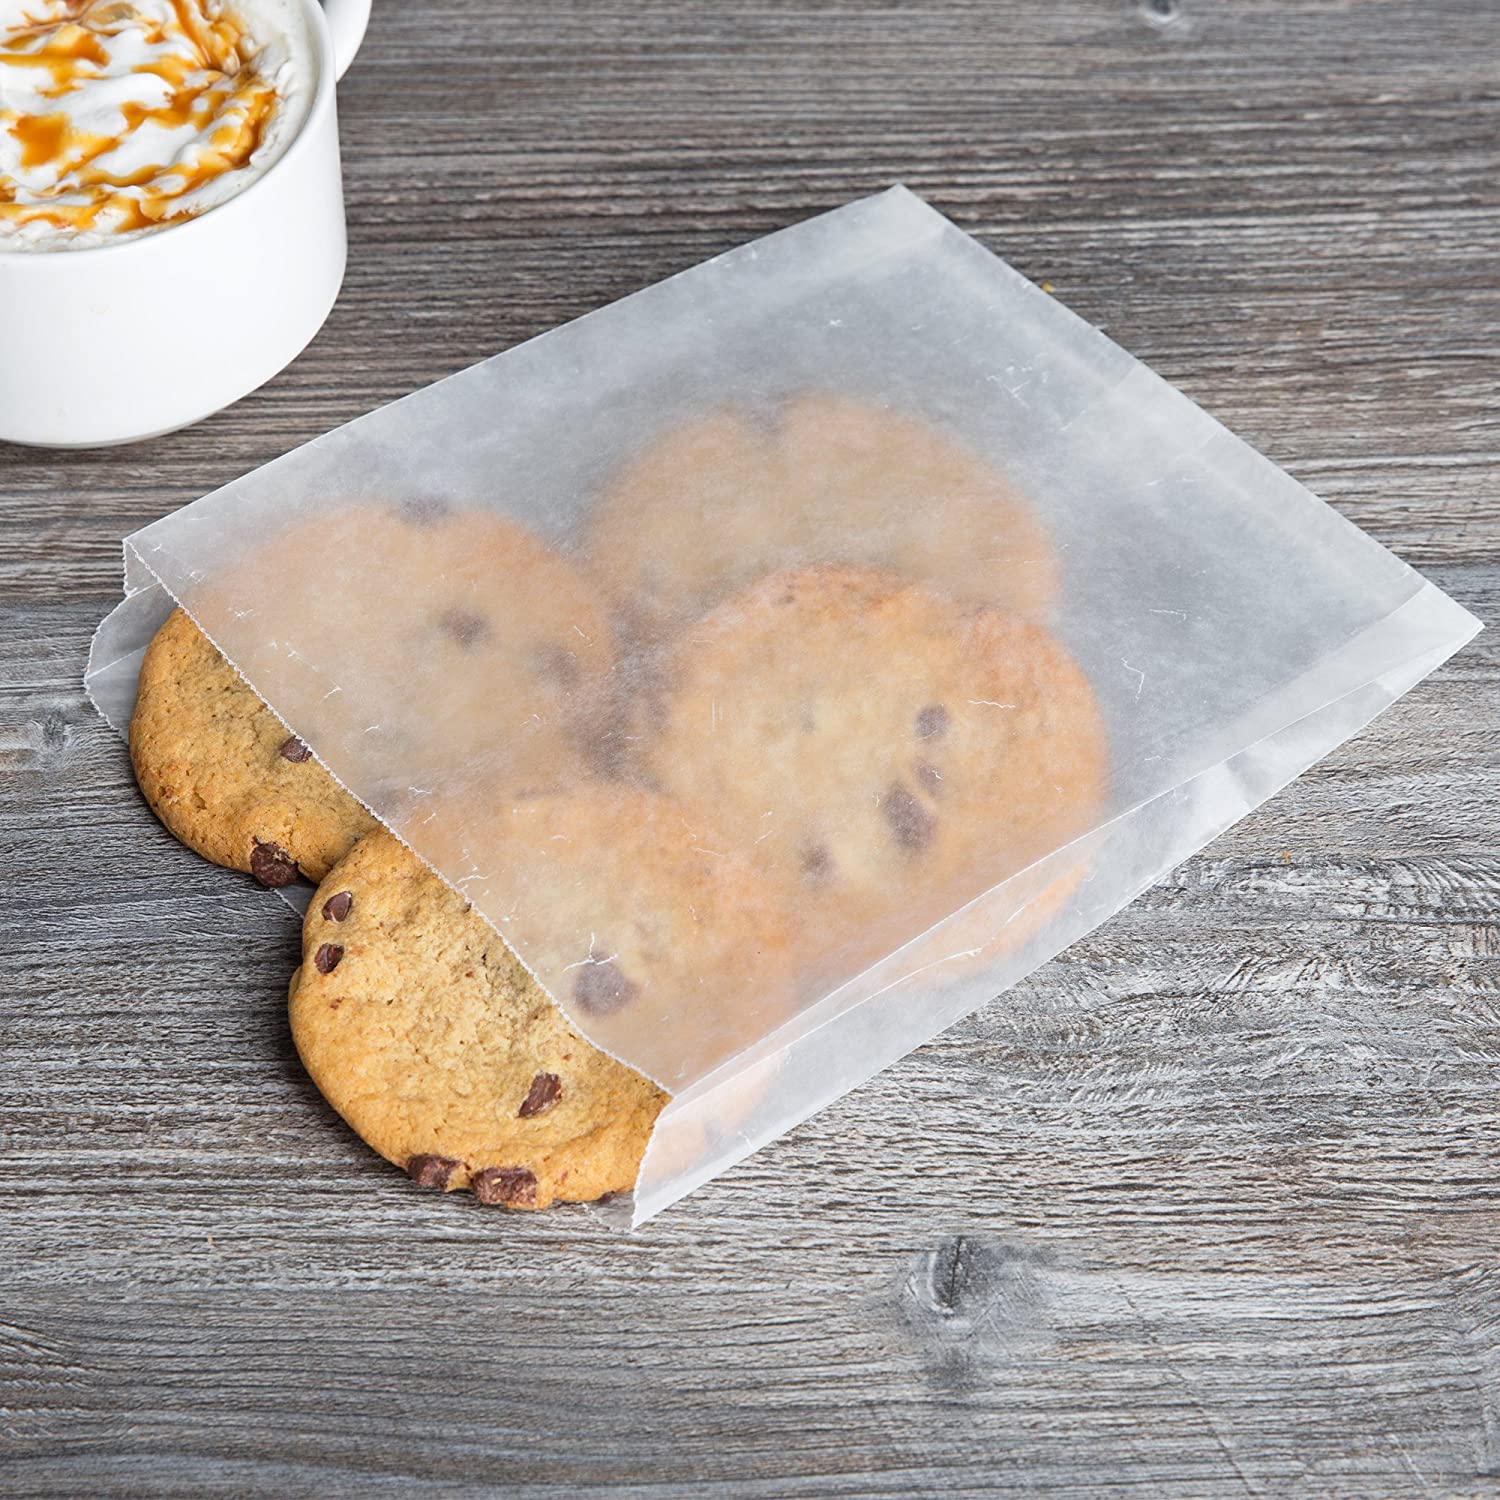 Printable Recipe on Treat Bags Project